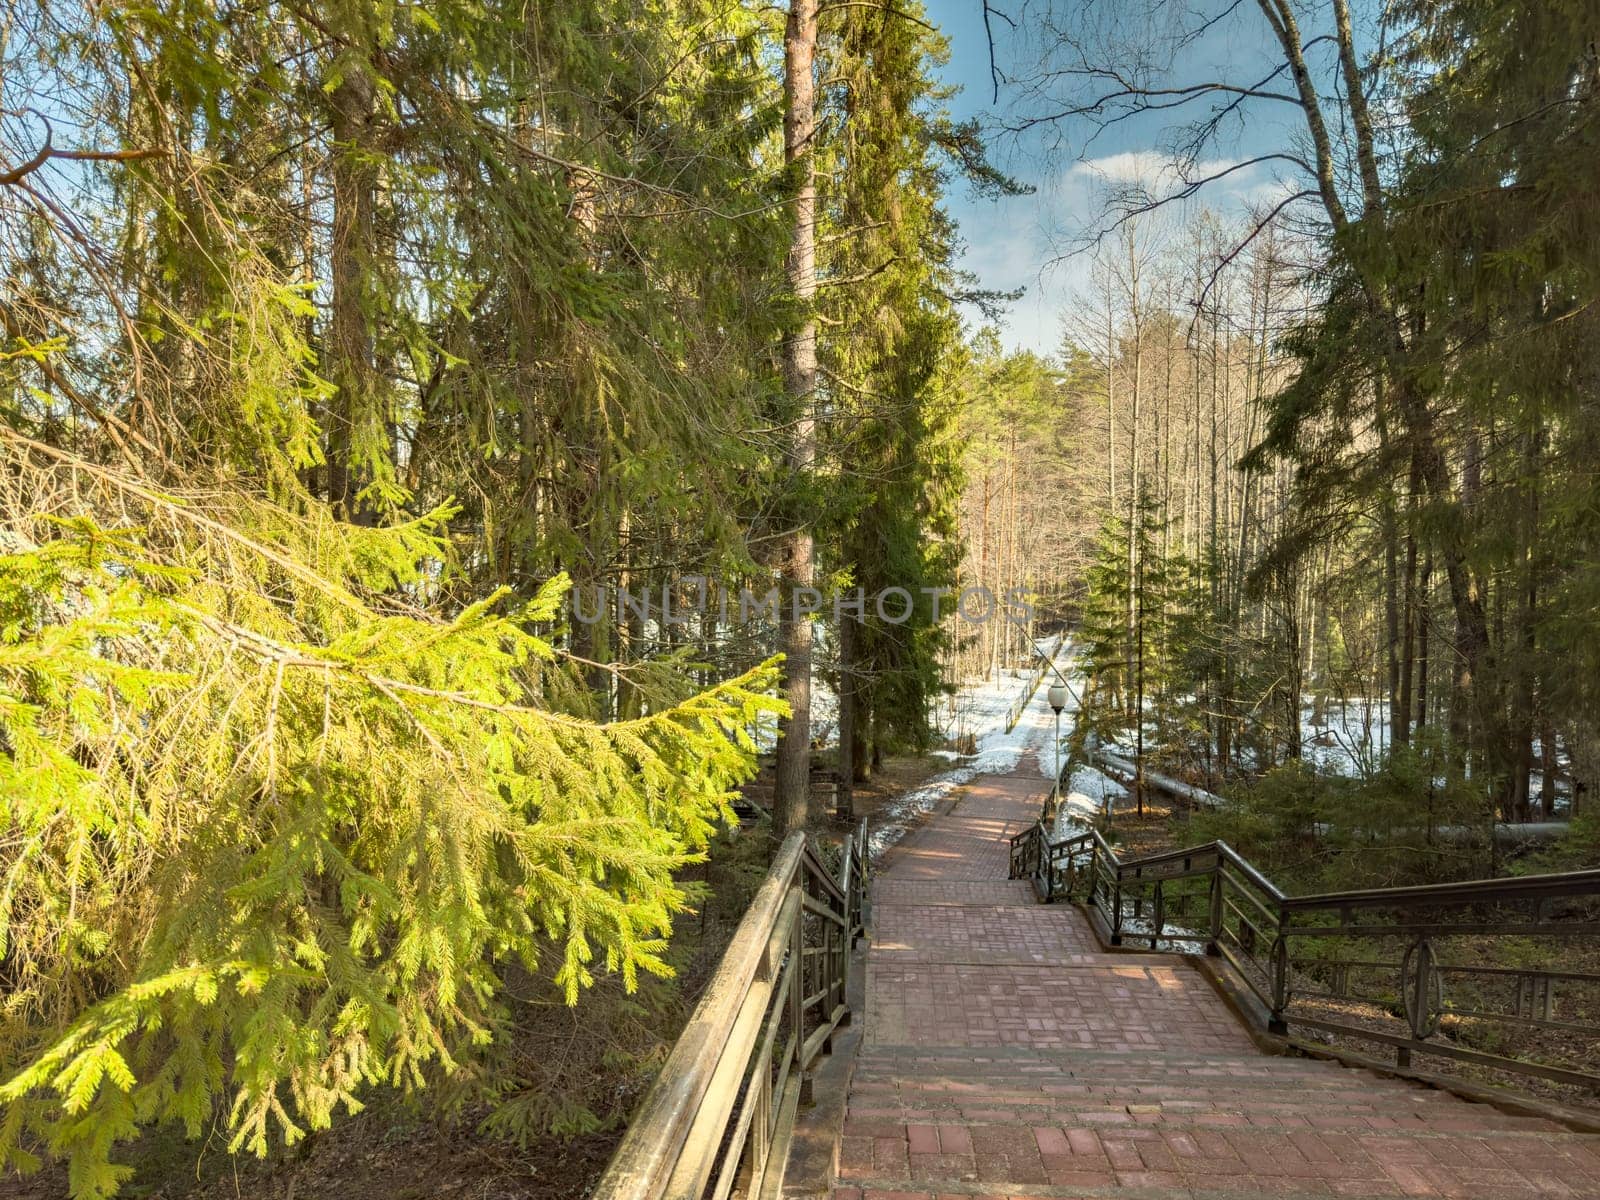 Stairs to the frozen river in the wild forest, The wild forest wakes up, the sun rays through the trees, the snow melts, streams flow, green fir-trees at clear sunny day, snow has almost thawed by vladimirdrozdin